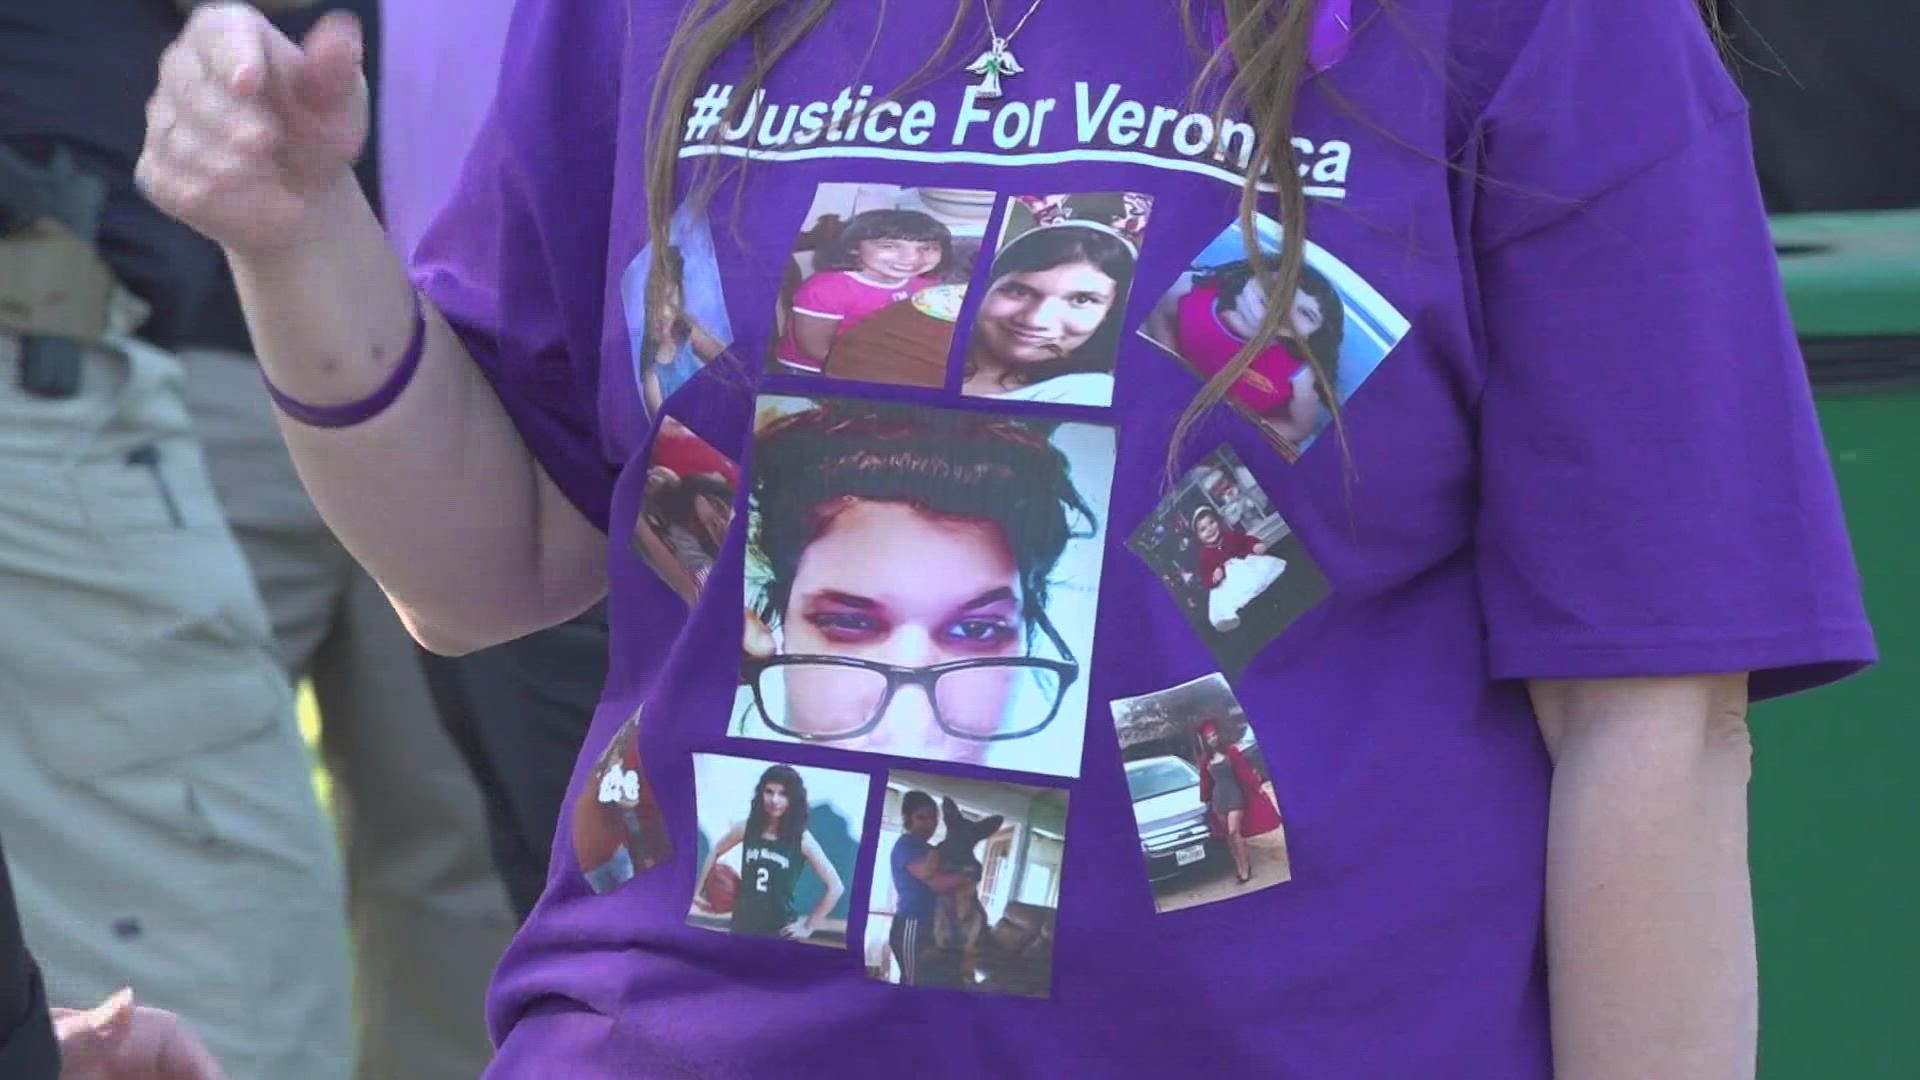 The West Texas community came together to show support for those impacted by domestic violence.